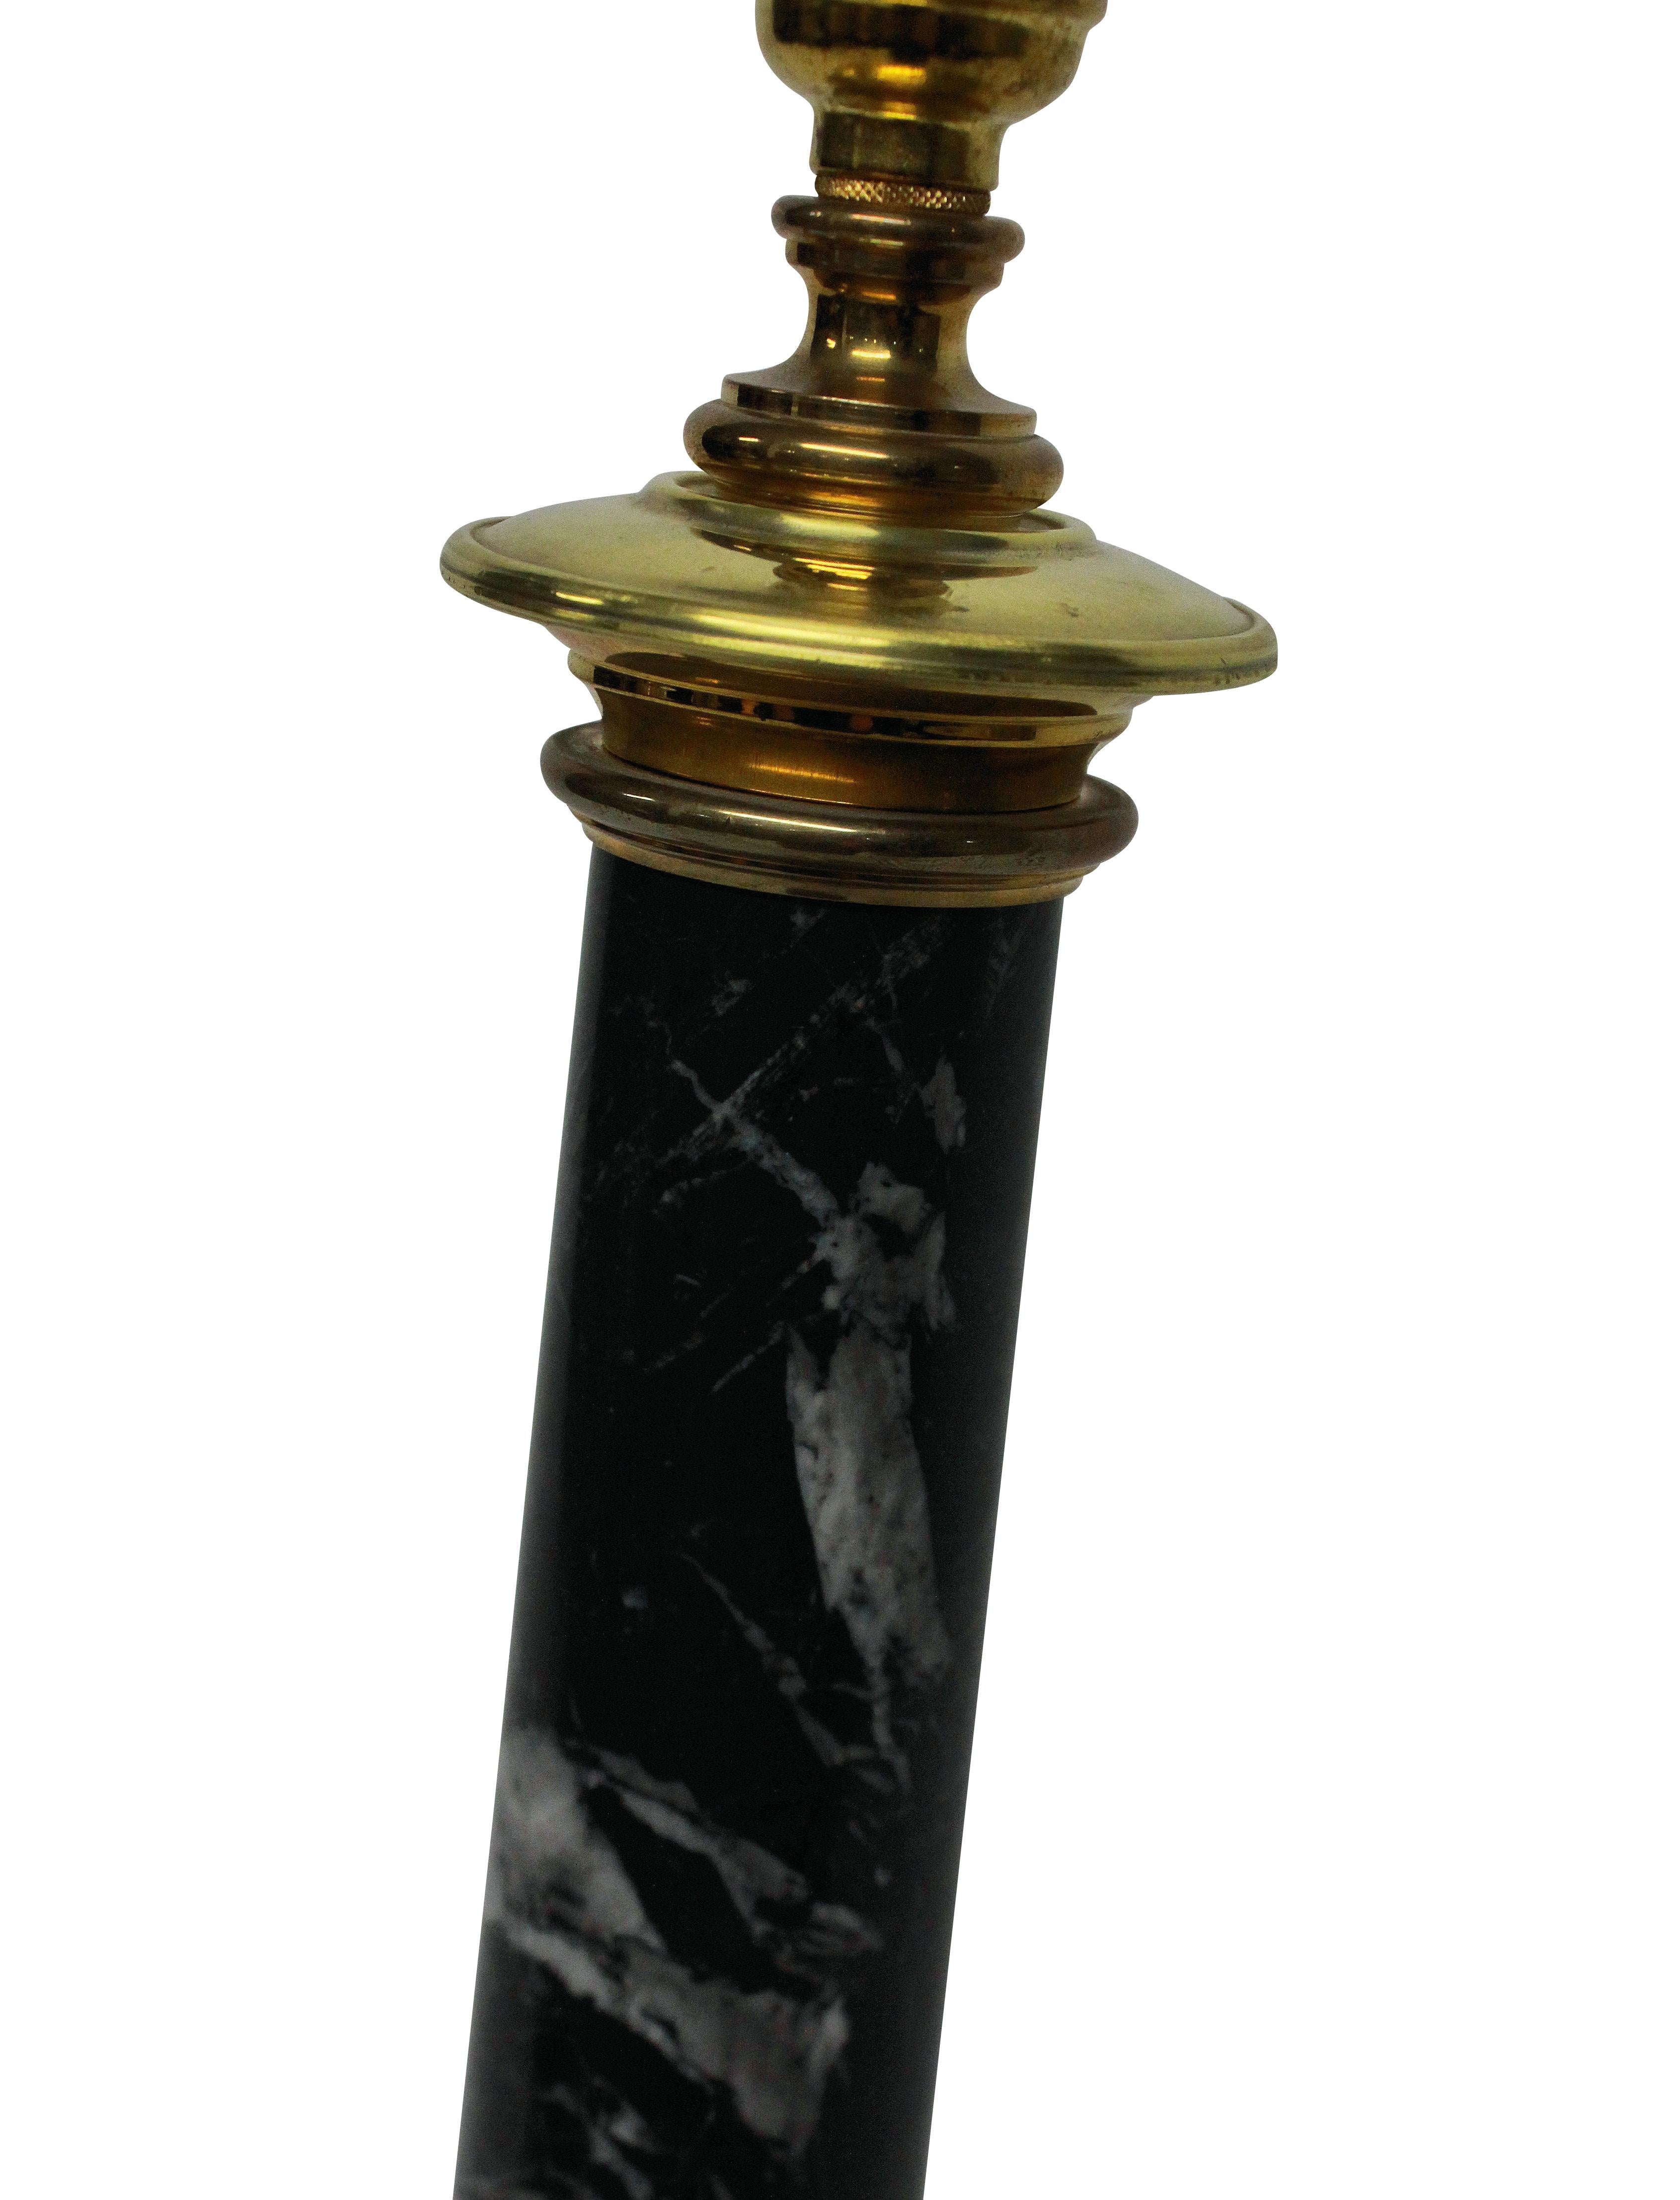 A pair of Italian column lamps in grey Tuscan marble, with gold-plated metal work.